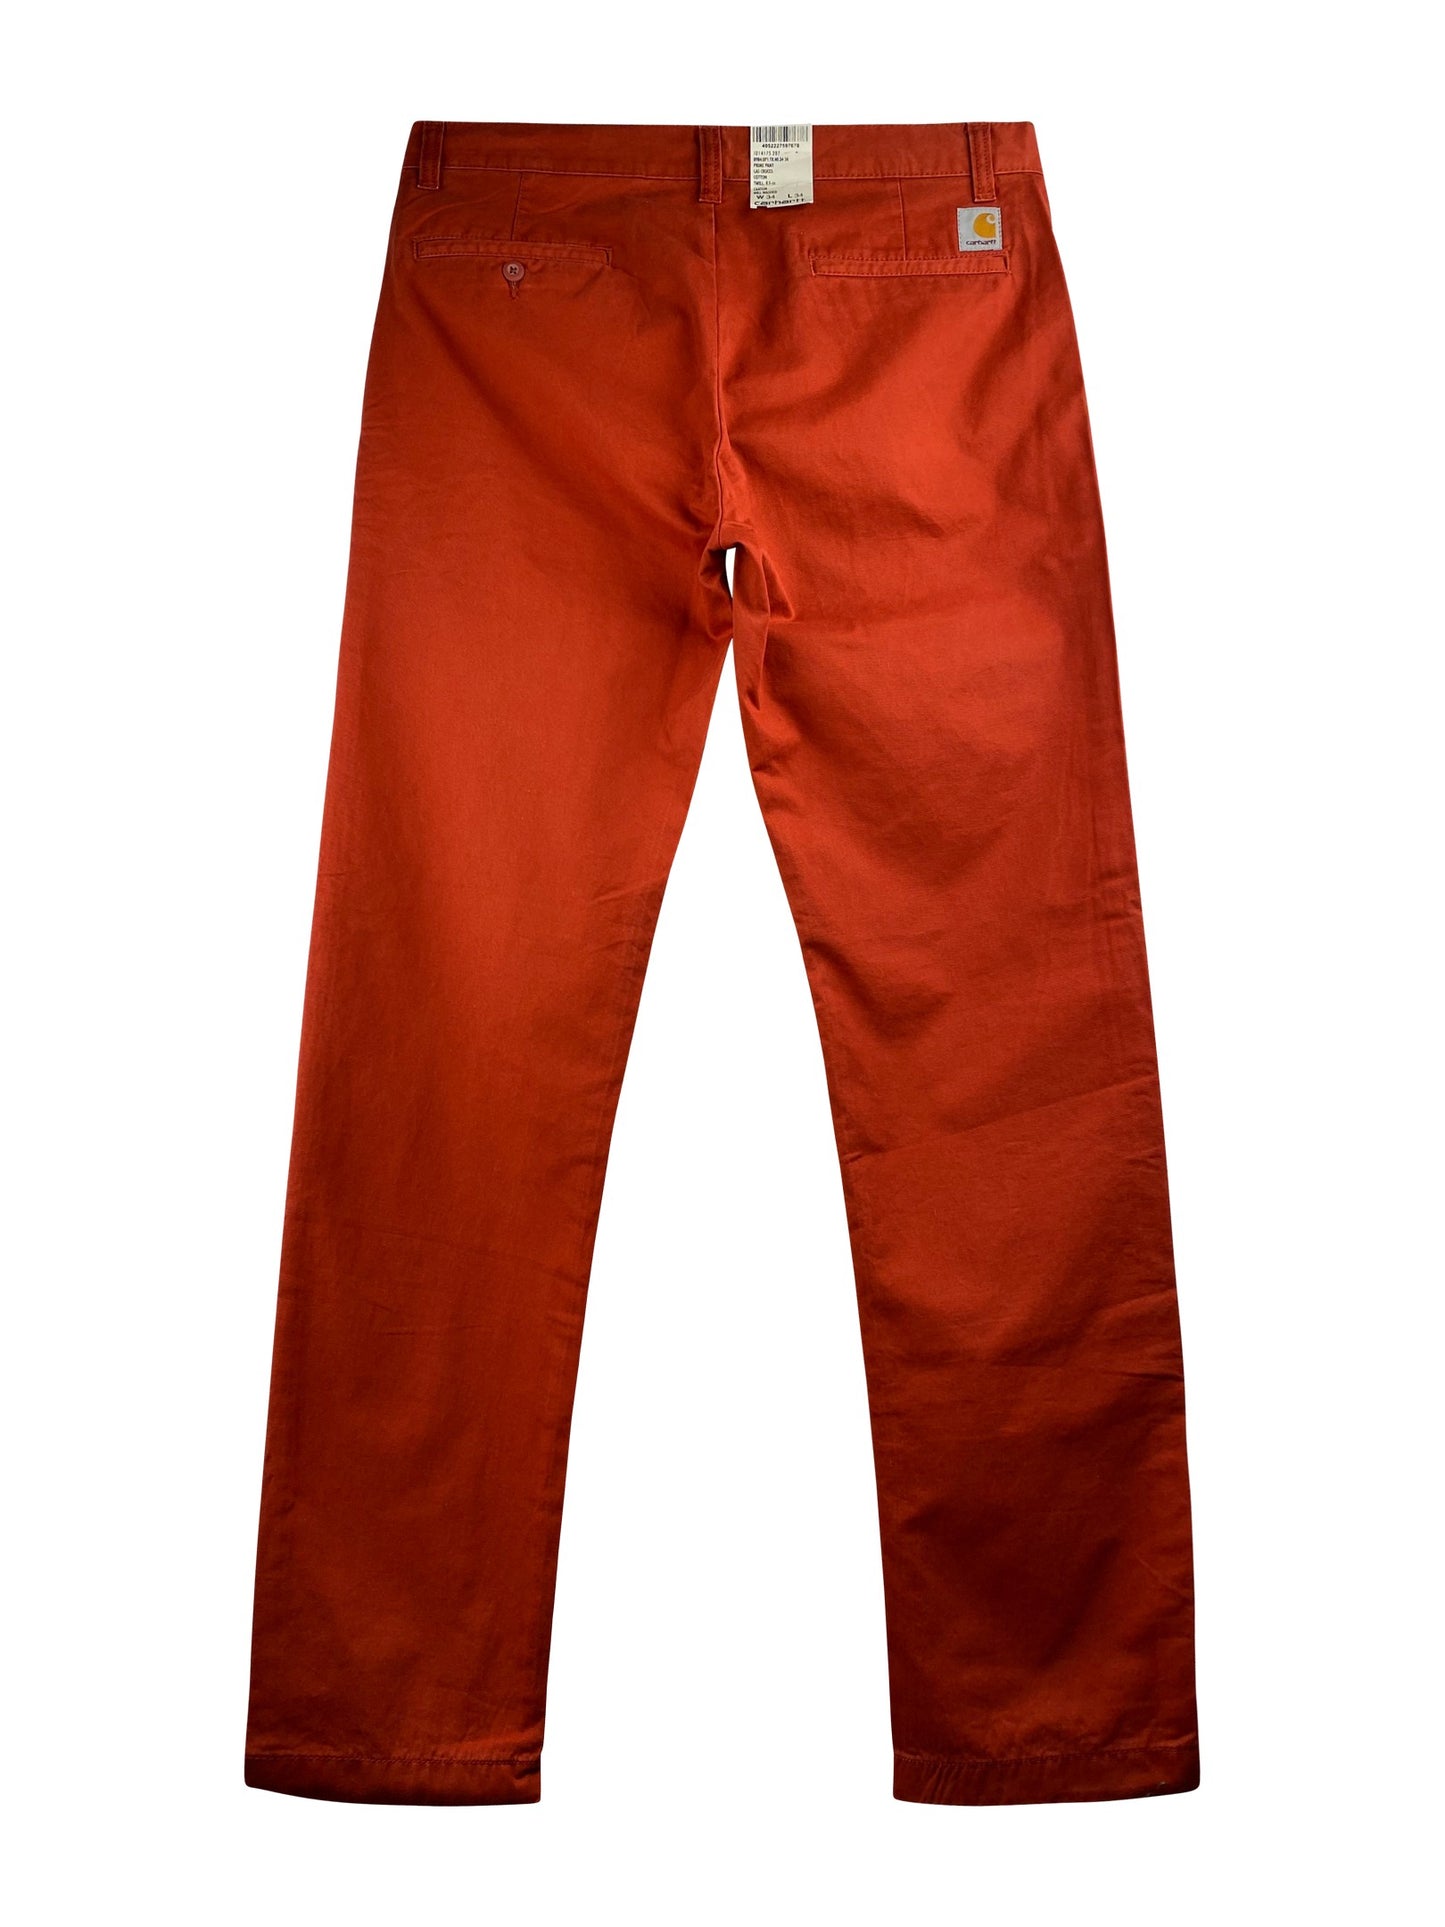 Carhartt Hose “Prime Pant Las Cruces” - canyon mill washed